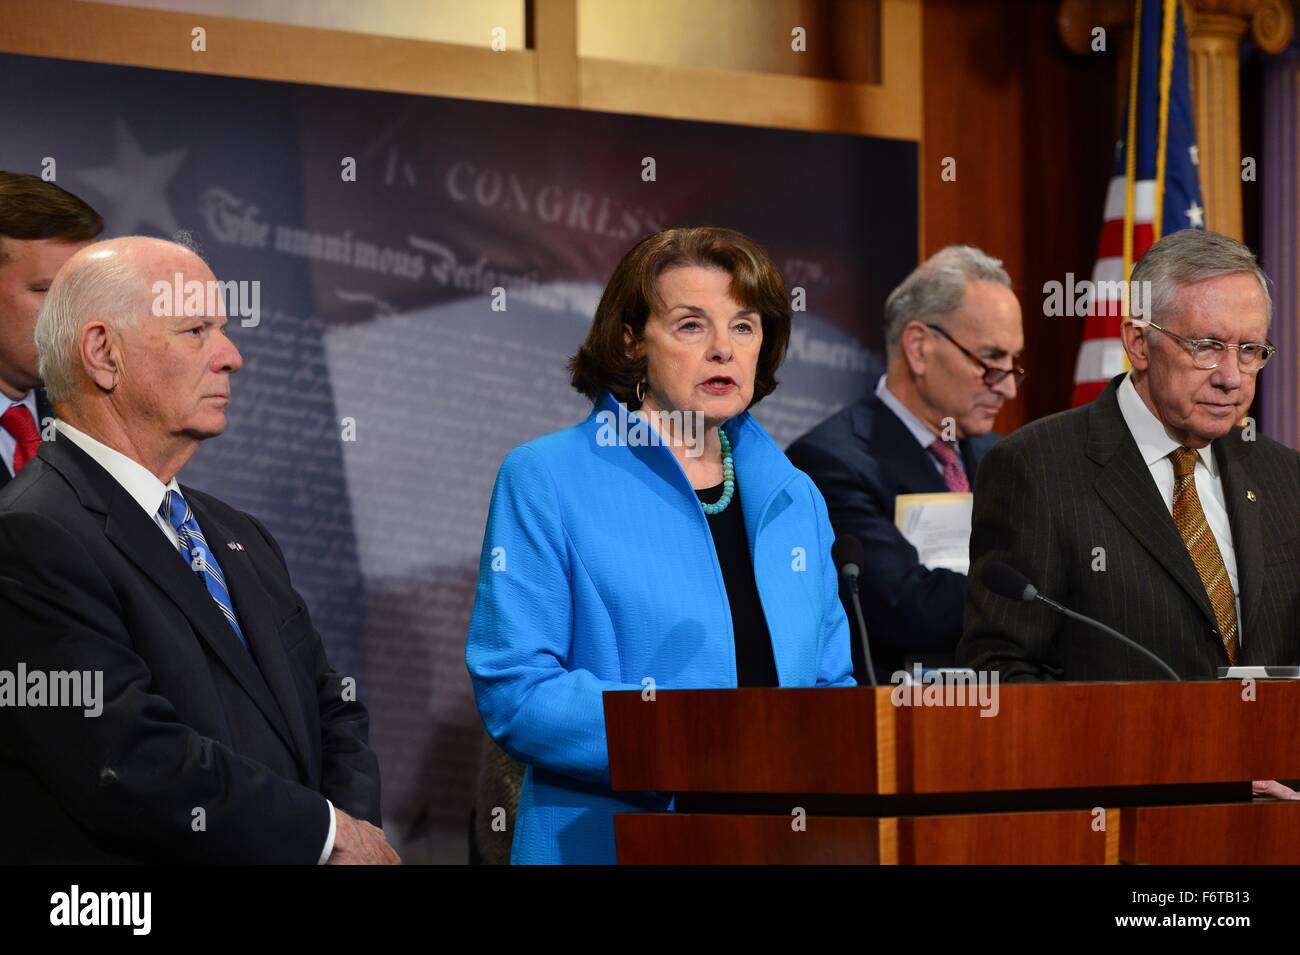 Washington DC, USA. 19th November, 2015. U.S. Senator Dianne Feinstein joined by other Democrats discusses their opposition to tighter restrictions on Syrian refugees coming to the U.S. during a press conference on Capitol Hill November 19, 2015 in Washington, DC.  Earlier the Republican controlled House passed a bill halting Syrian refugees until they undergo a more stringent vetting process following the Paris attacks. Stock Photo